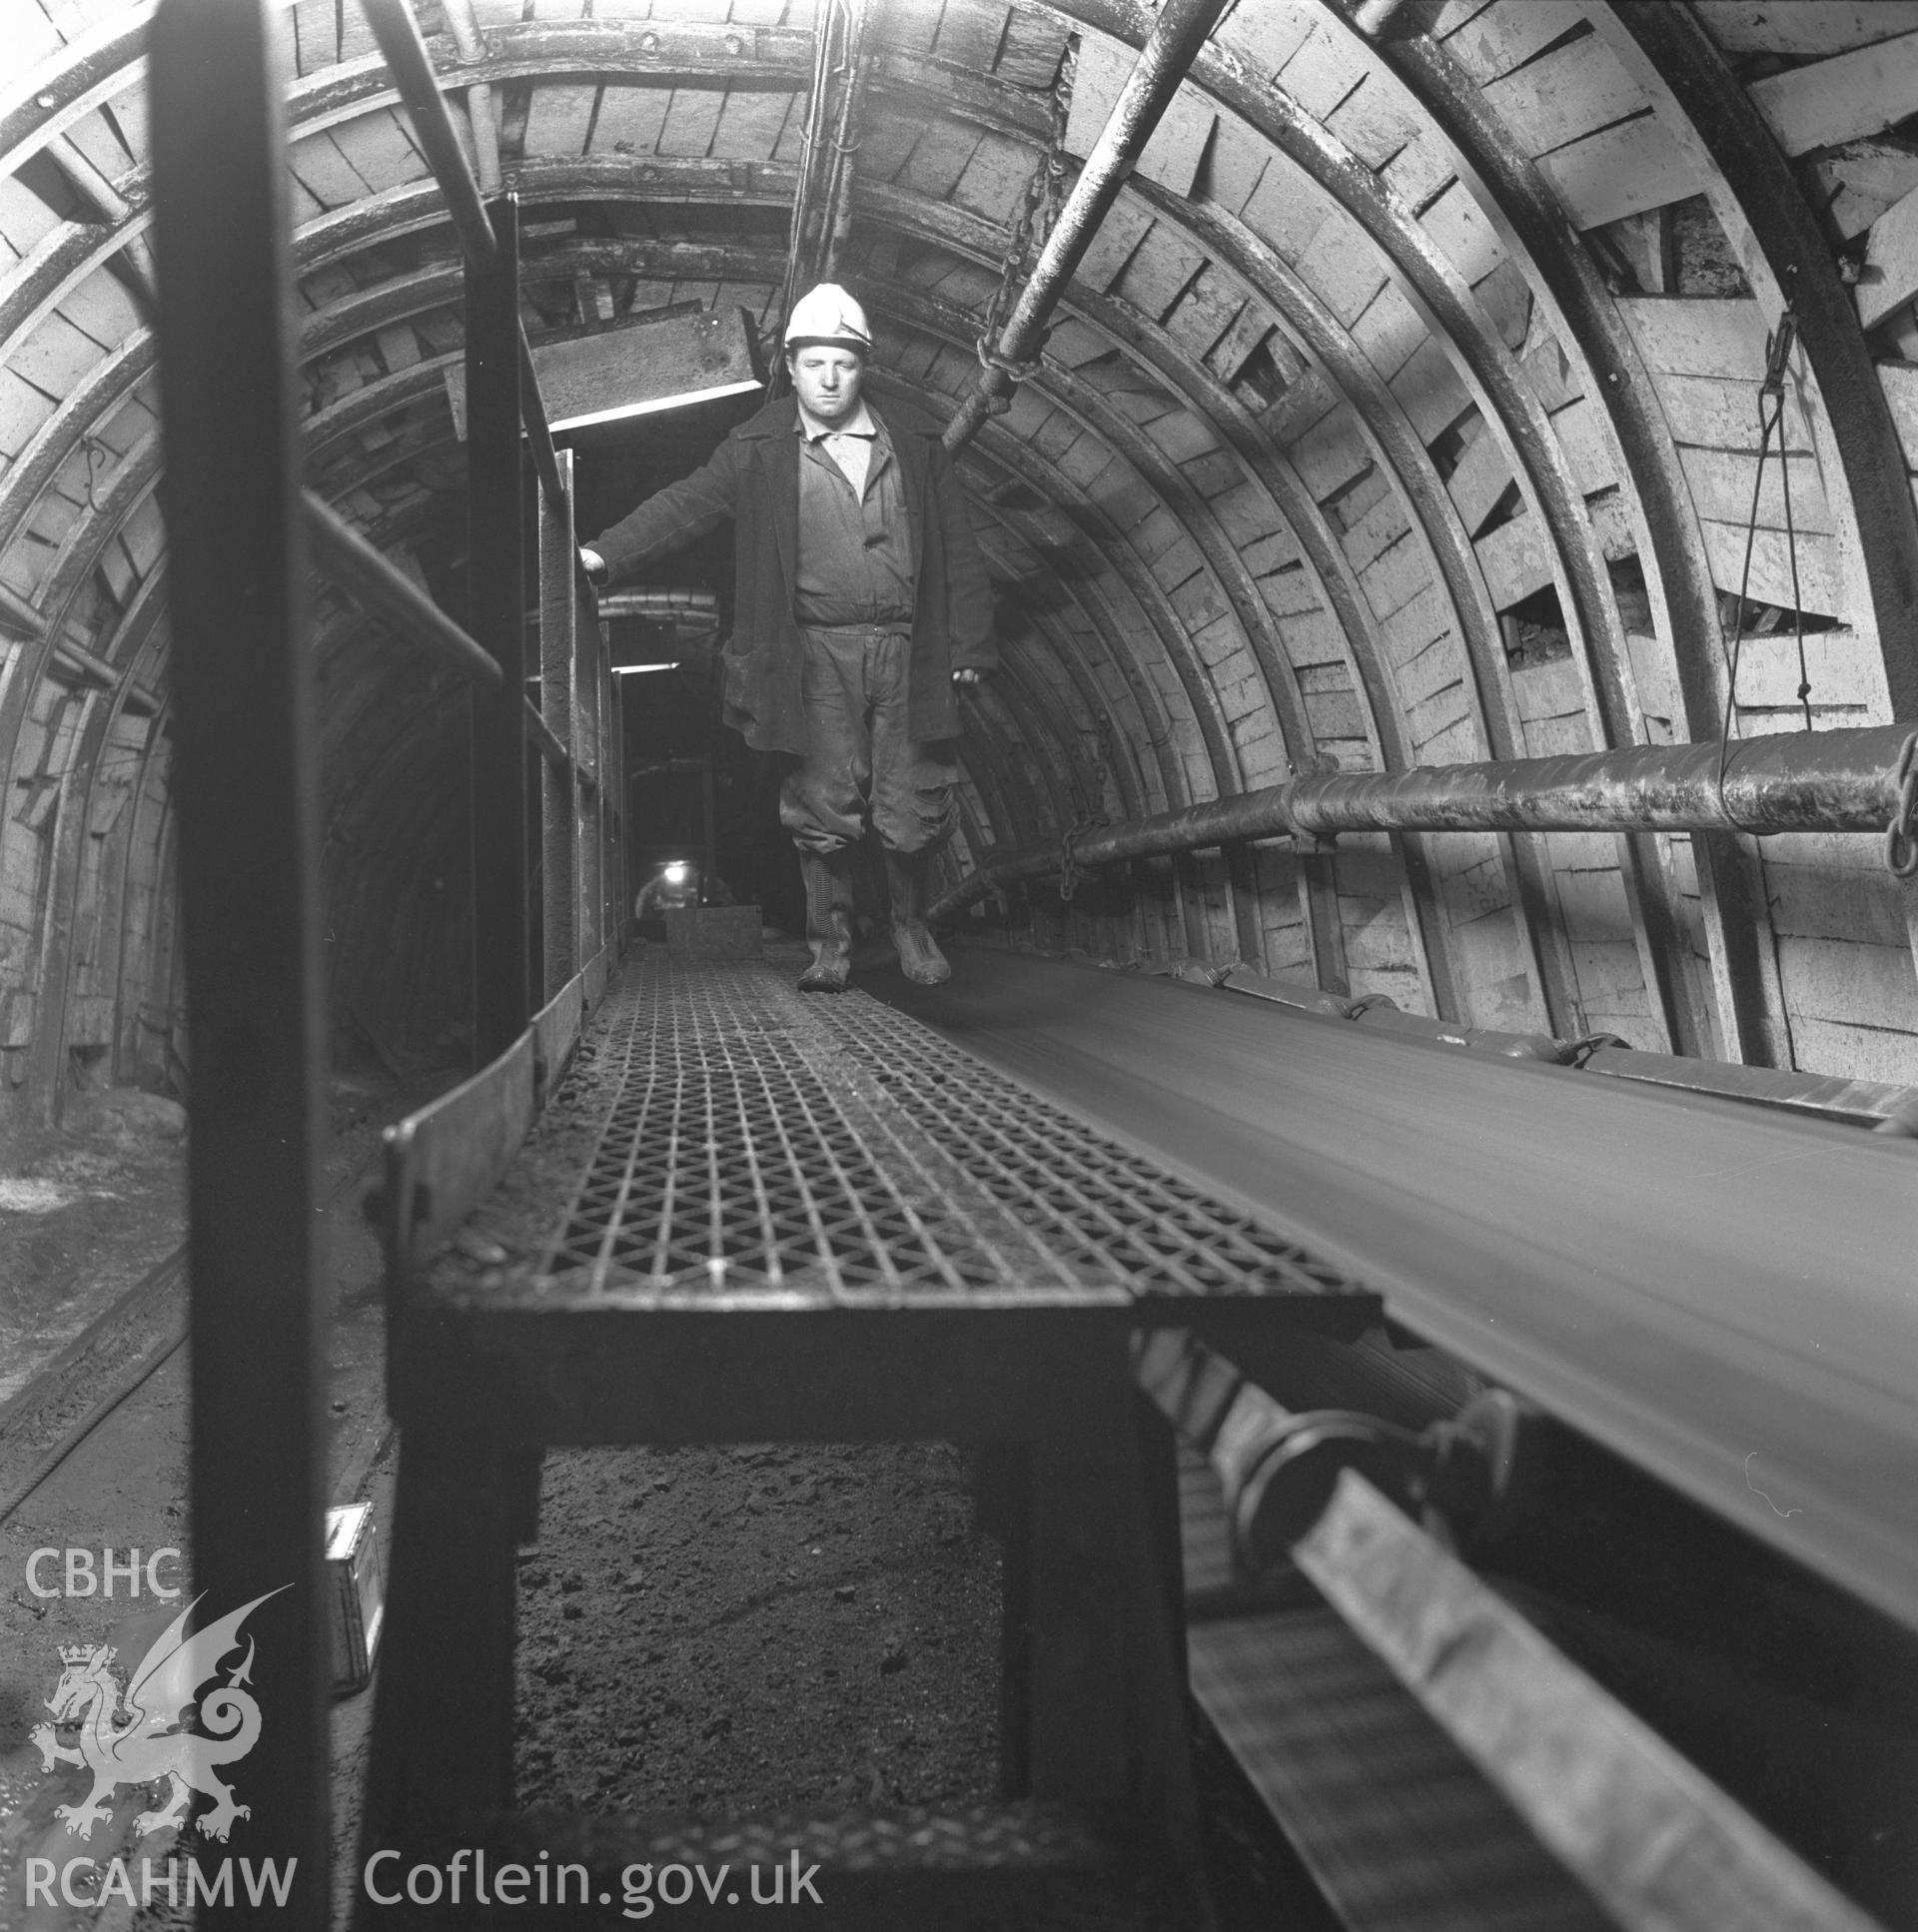 Digital copy of an acetate negative showing man riding conveyor alighting platform at New Mine, Big Pit, from the John Cornwell Collection.